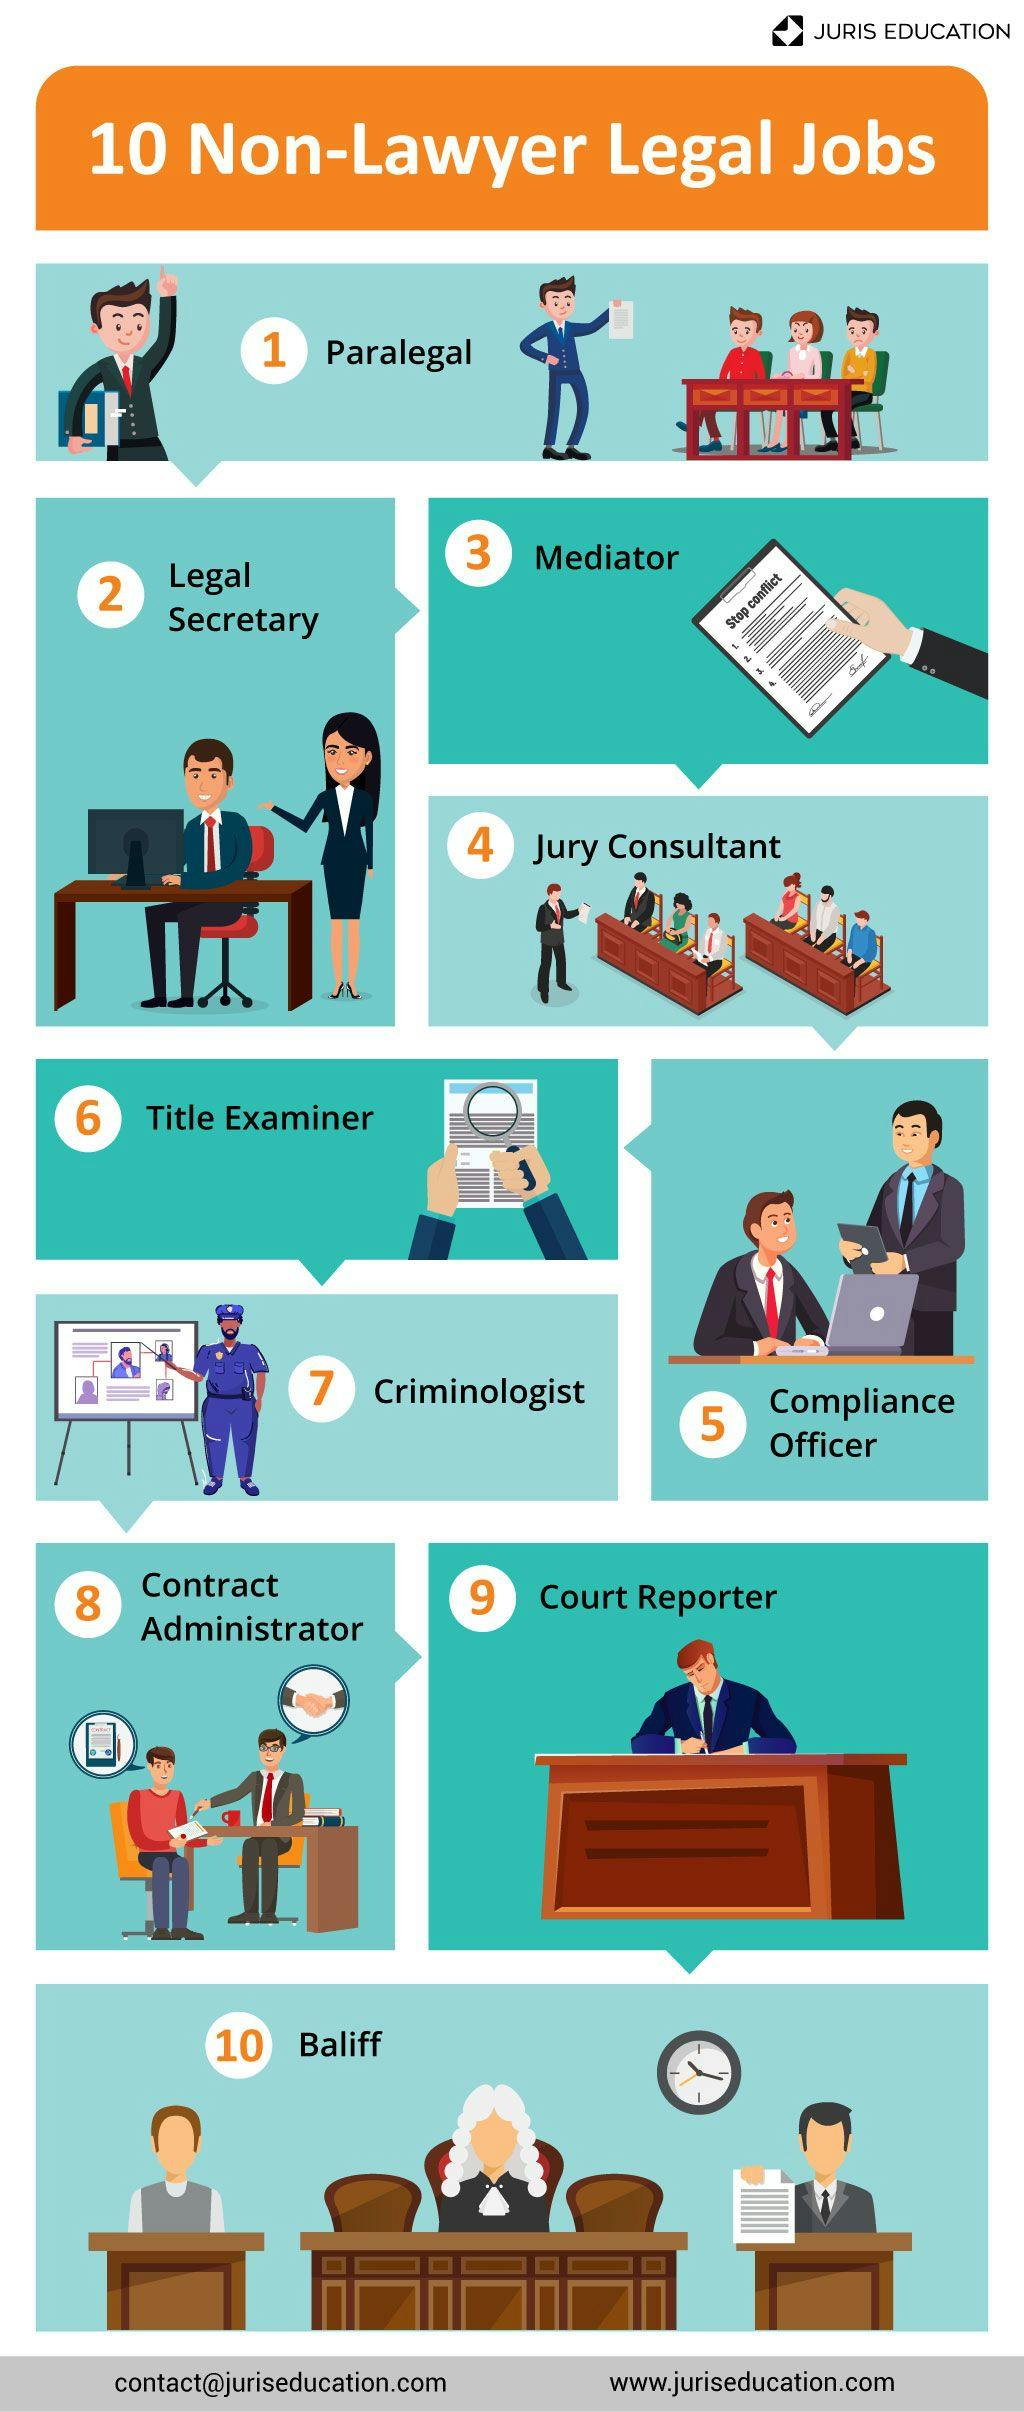 non-lawyer legal jobs